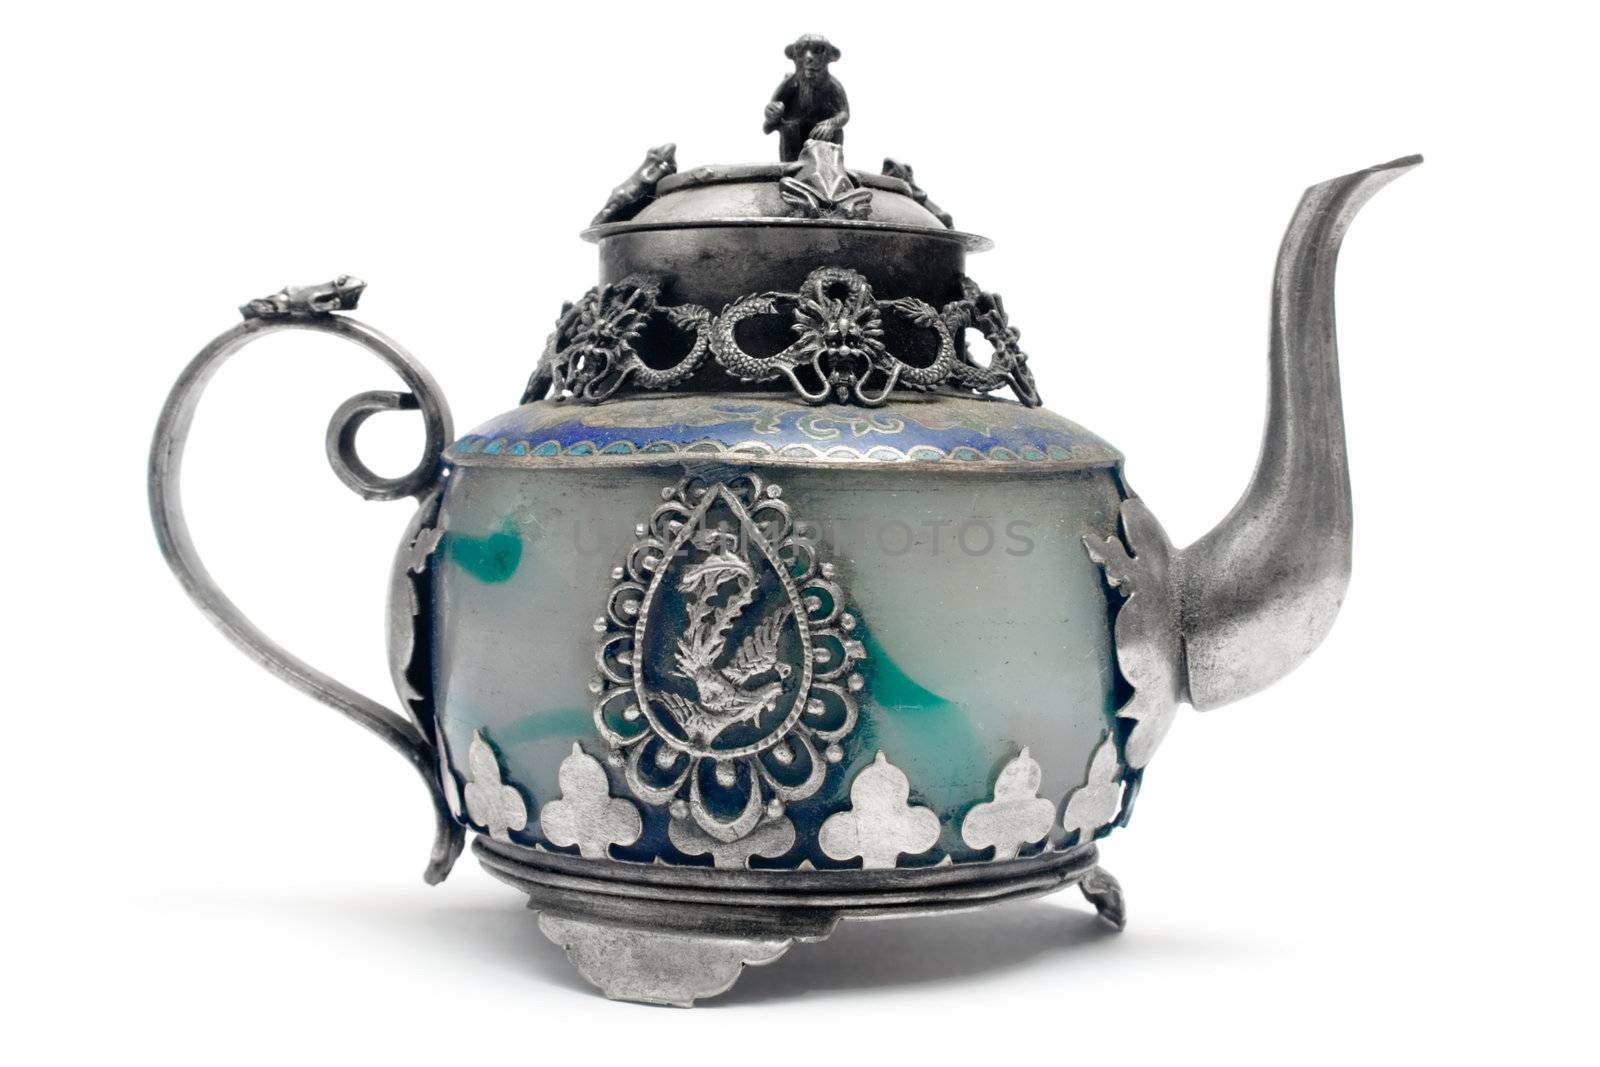 Antique Teapot by winterling